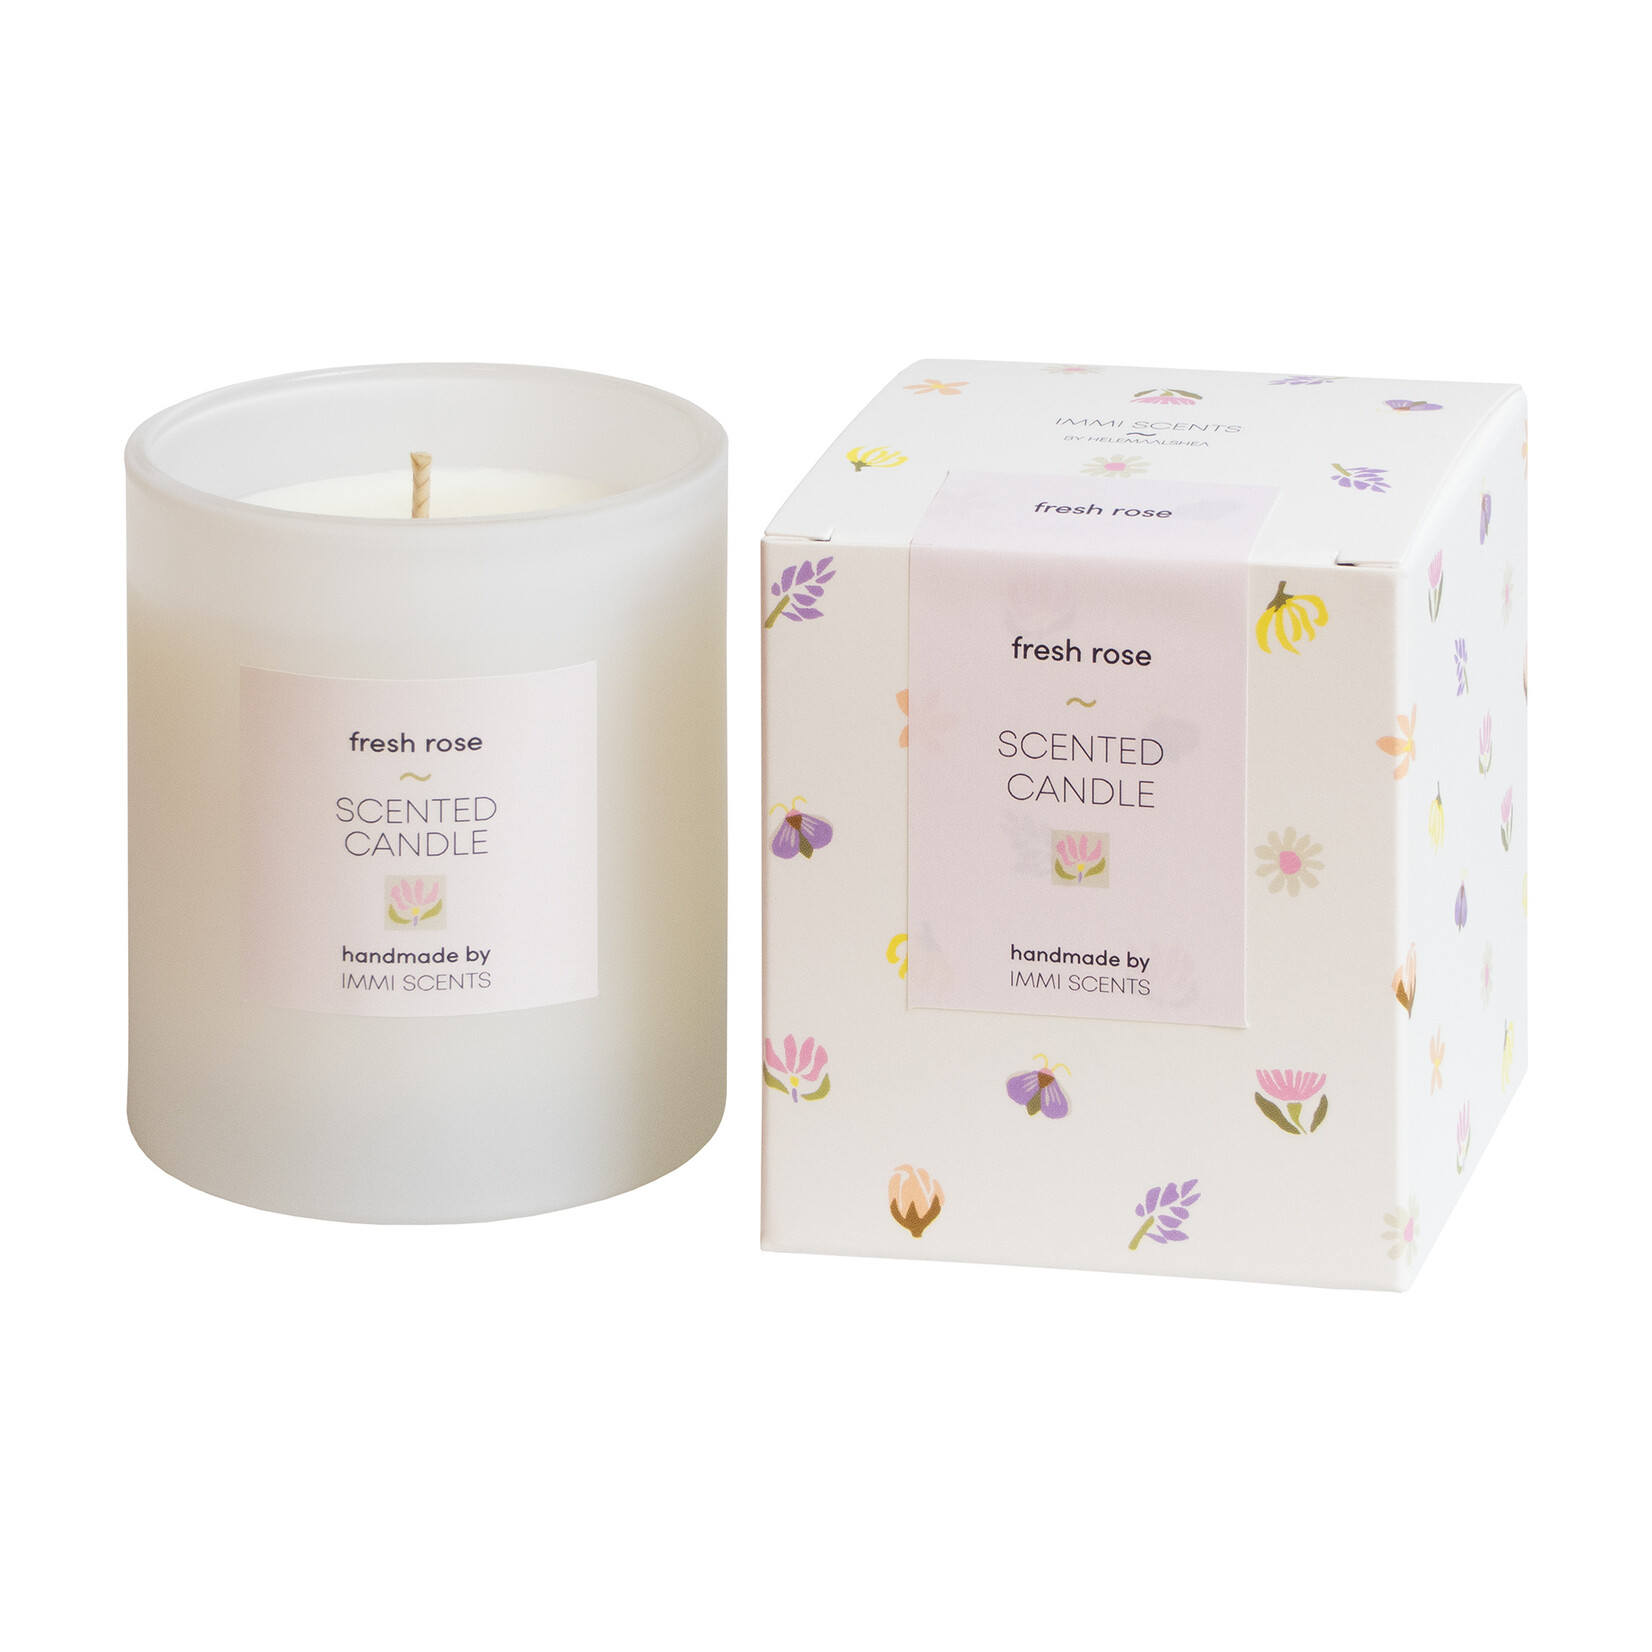 Scented candle - Fresh Rose - white